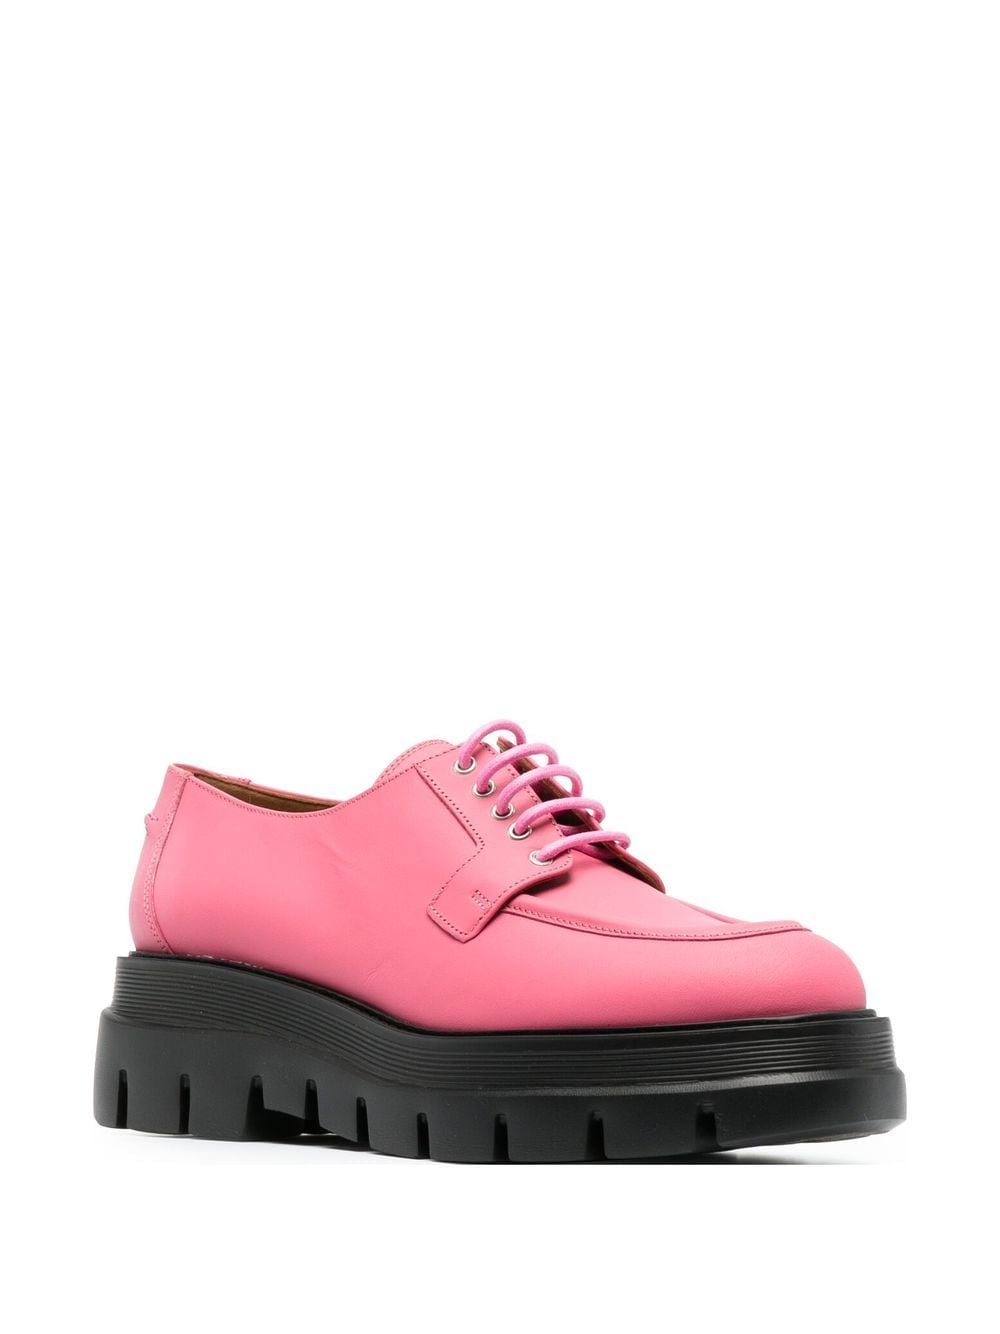 ATP Atelier Pezzana chunky-sole lace-up Shoes - Farfetch